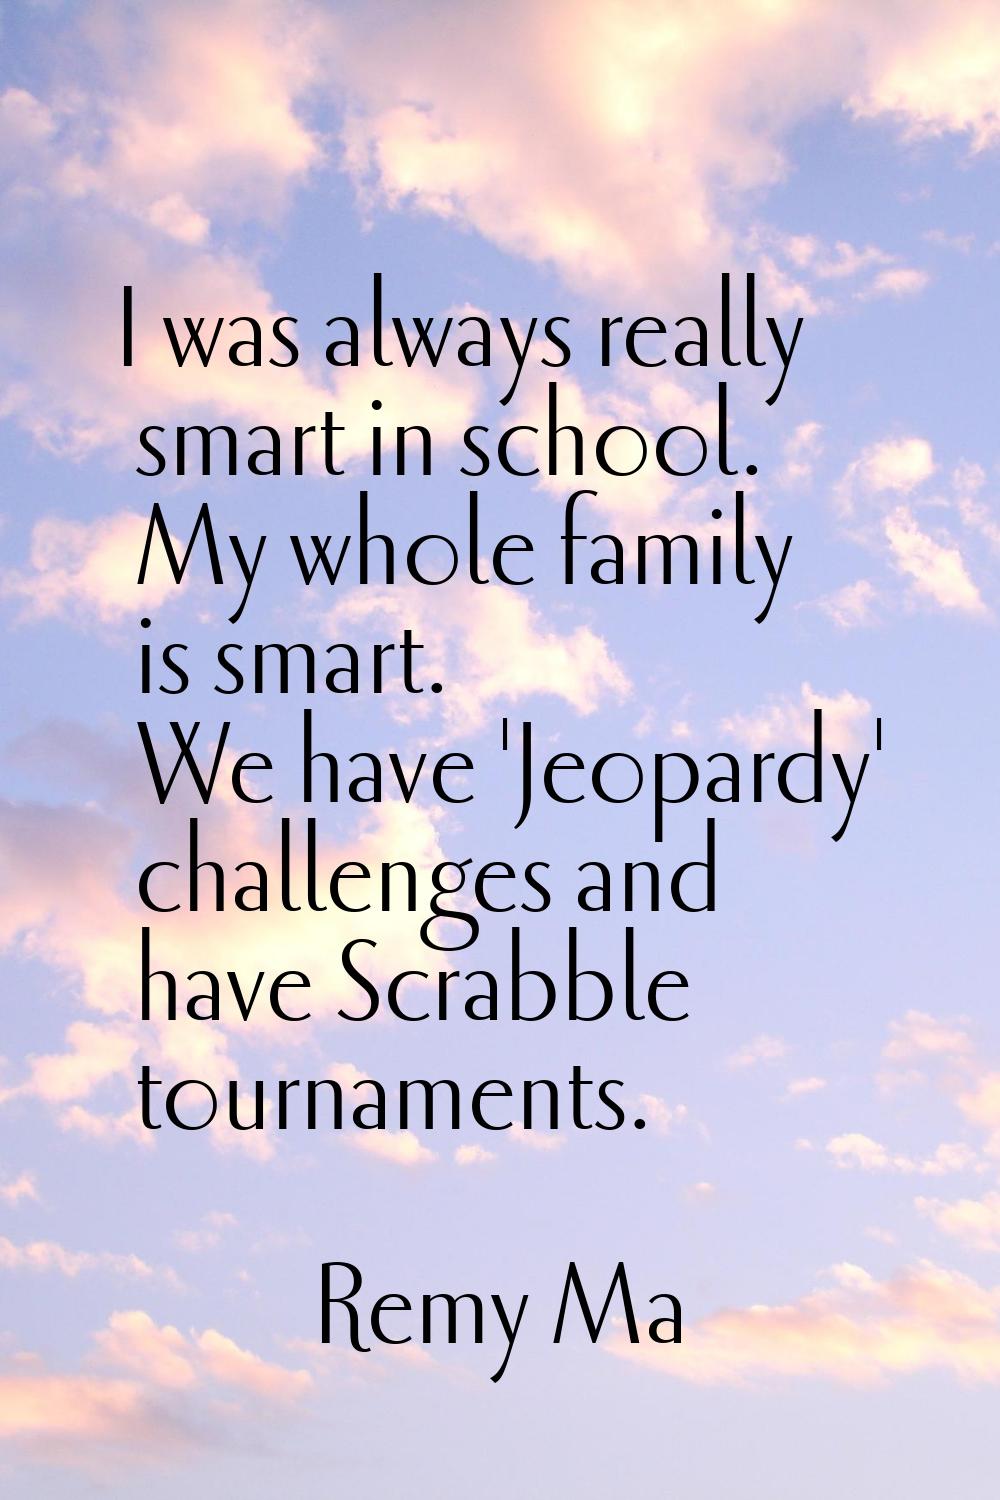 I was always really smart in school. My whole family is smart. We have 'Jeopardy' challenges and ha